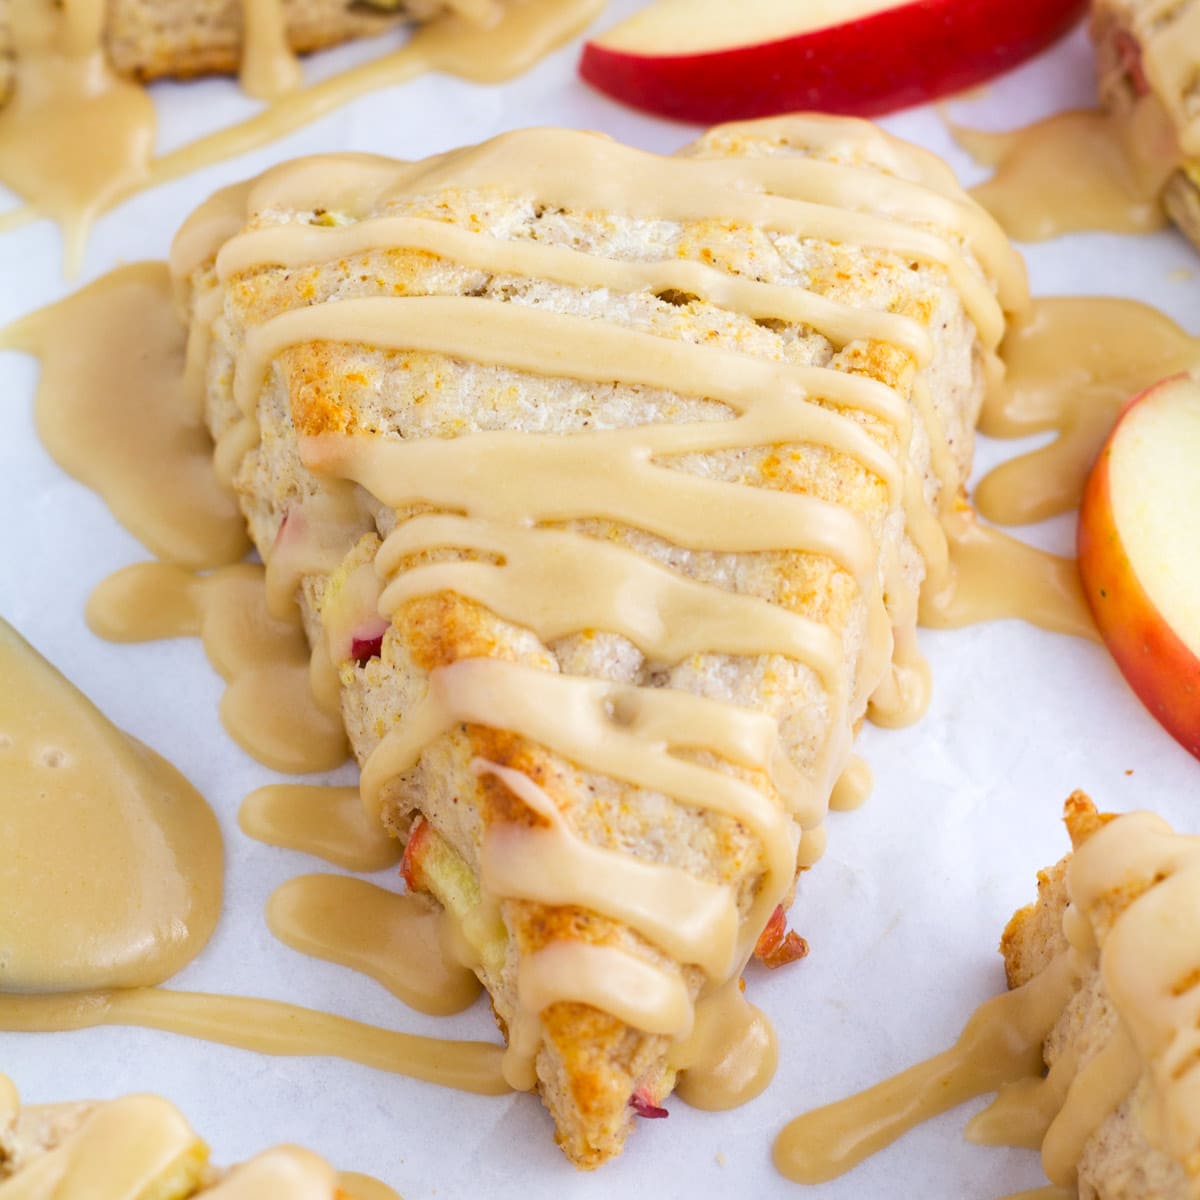 Apple scones drizzled with maple glaze.